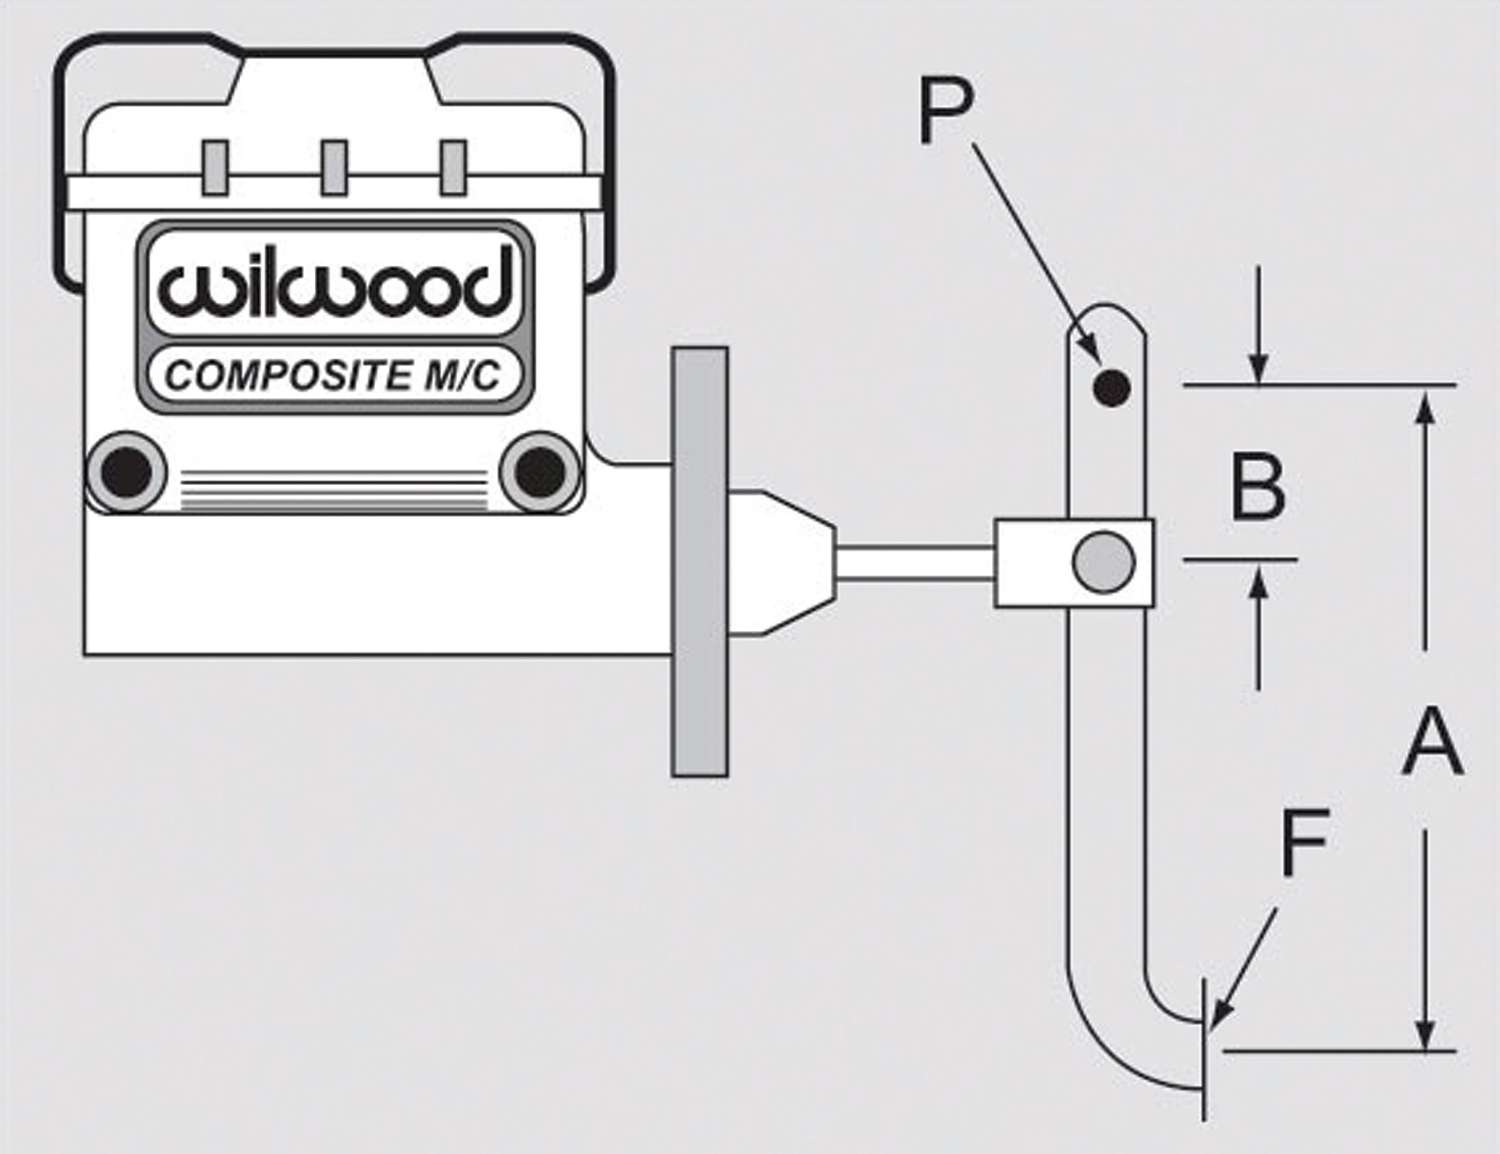 a diagram of the Wilwood pedal ratio